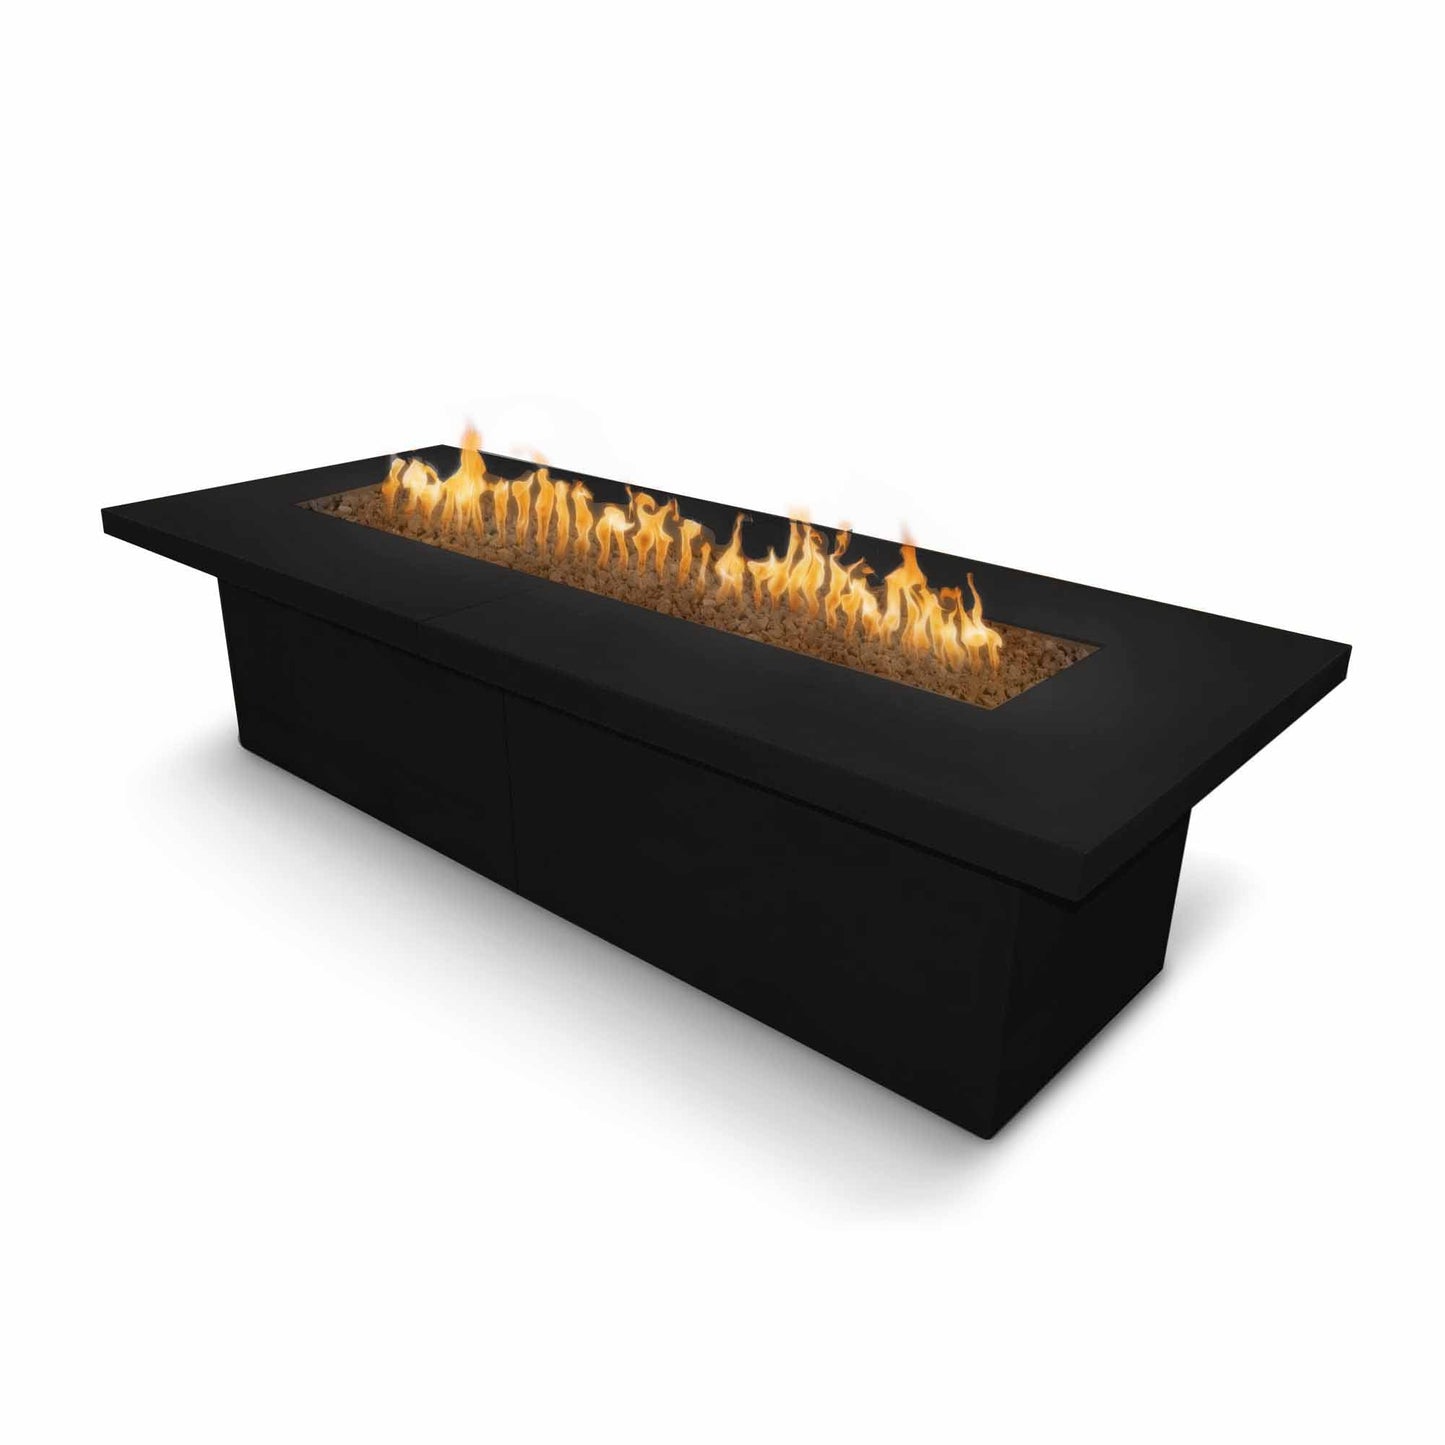 The Outdoor Plus Rectangular Newport 120" Copper Vein Powder Coated Metal Liquid Propane Fire Pit with Match Lit Ignition